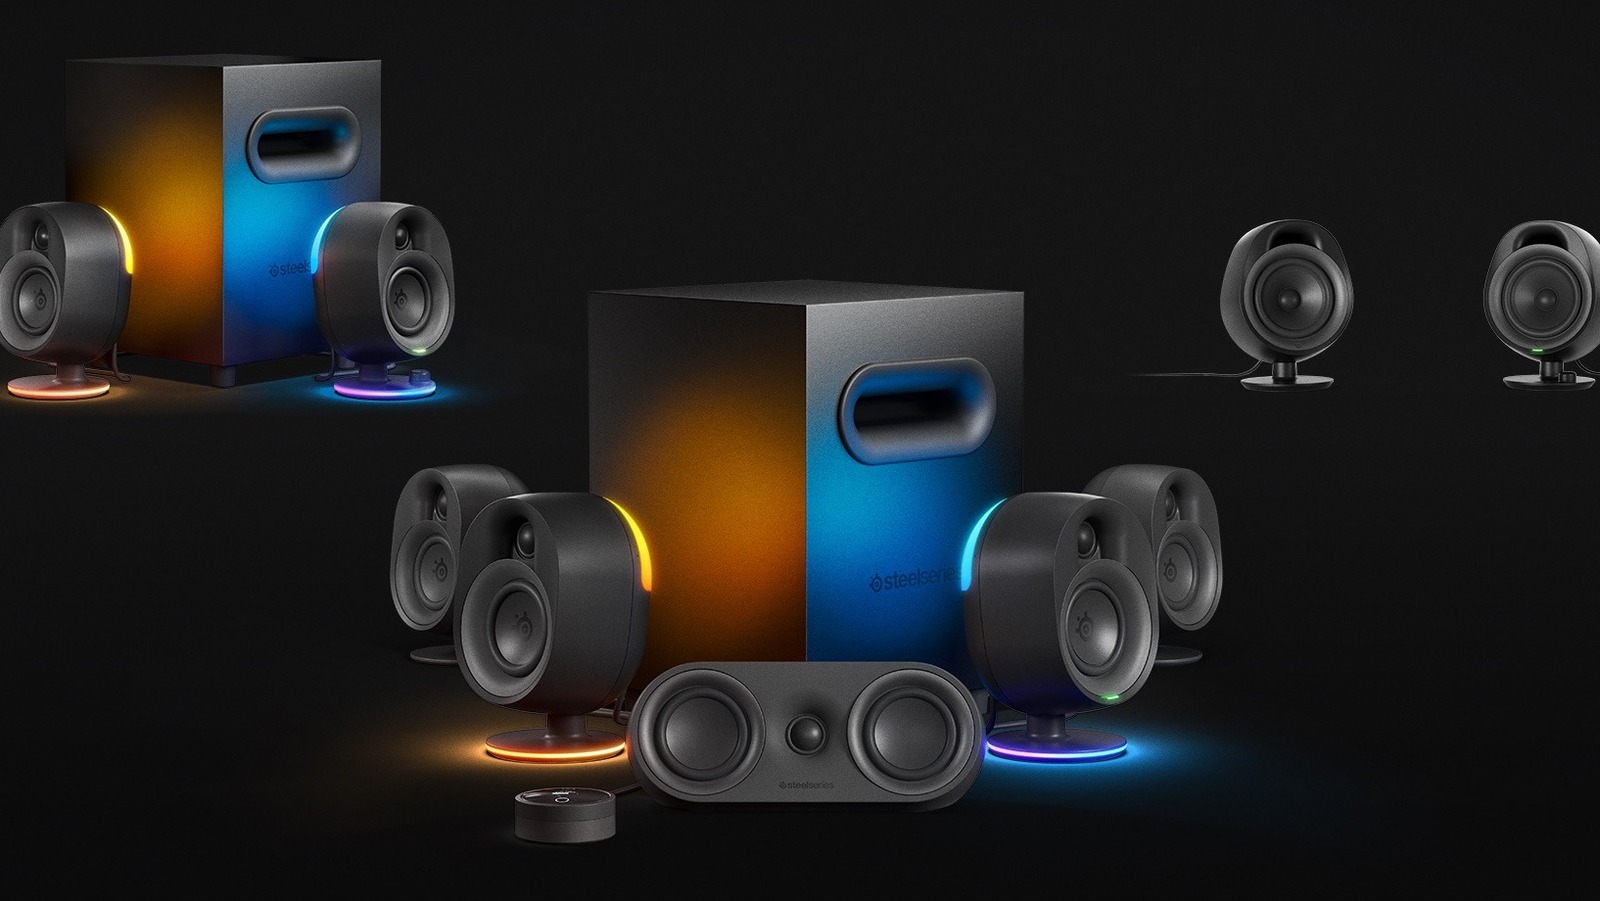 steelseries-goes-hard-with-first-pc-speakers-lineup